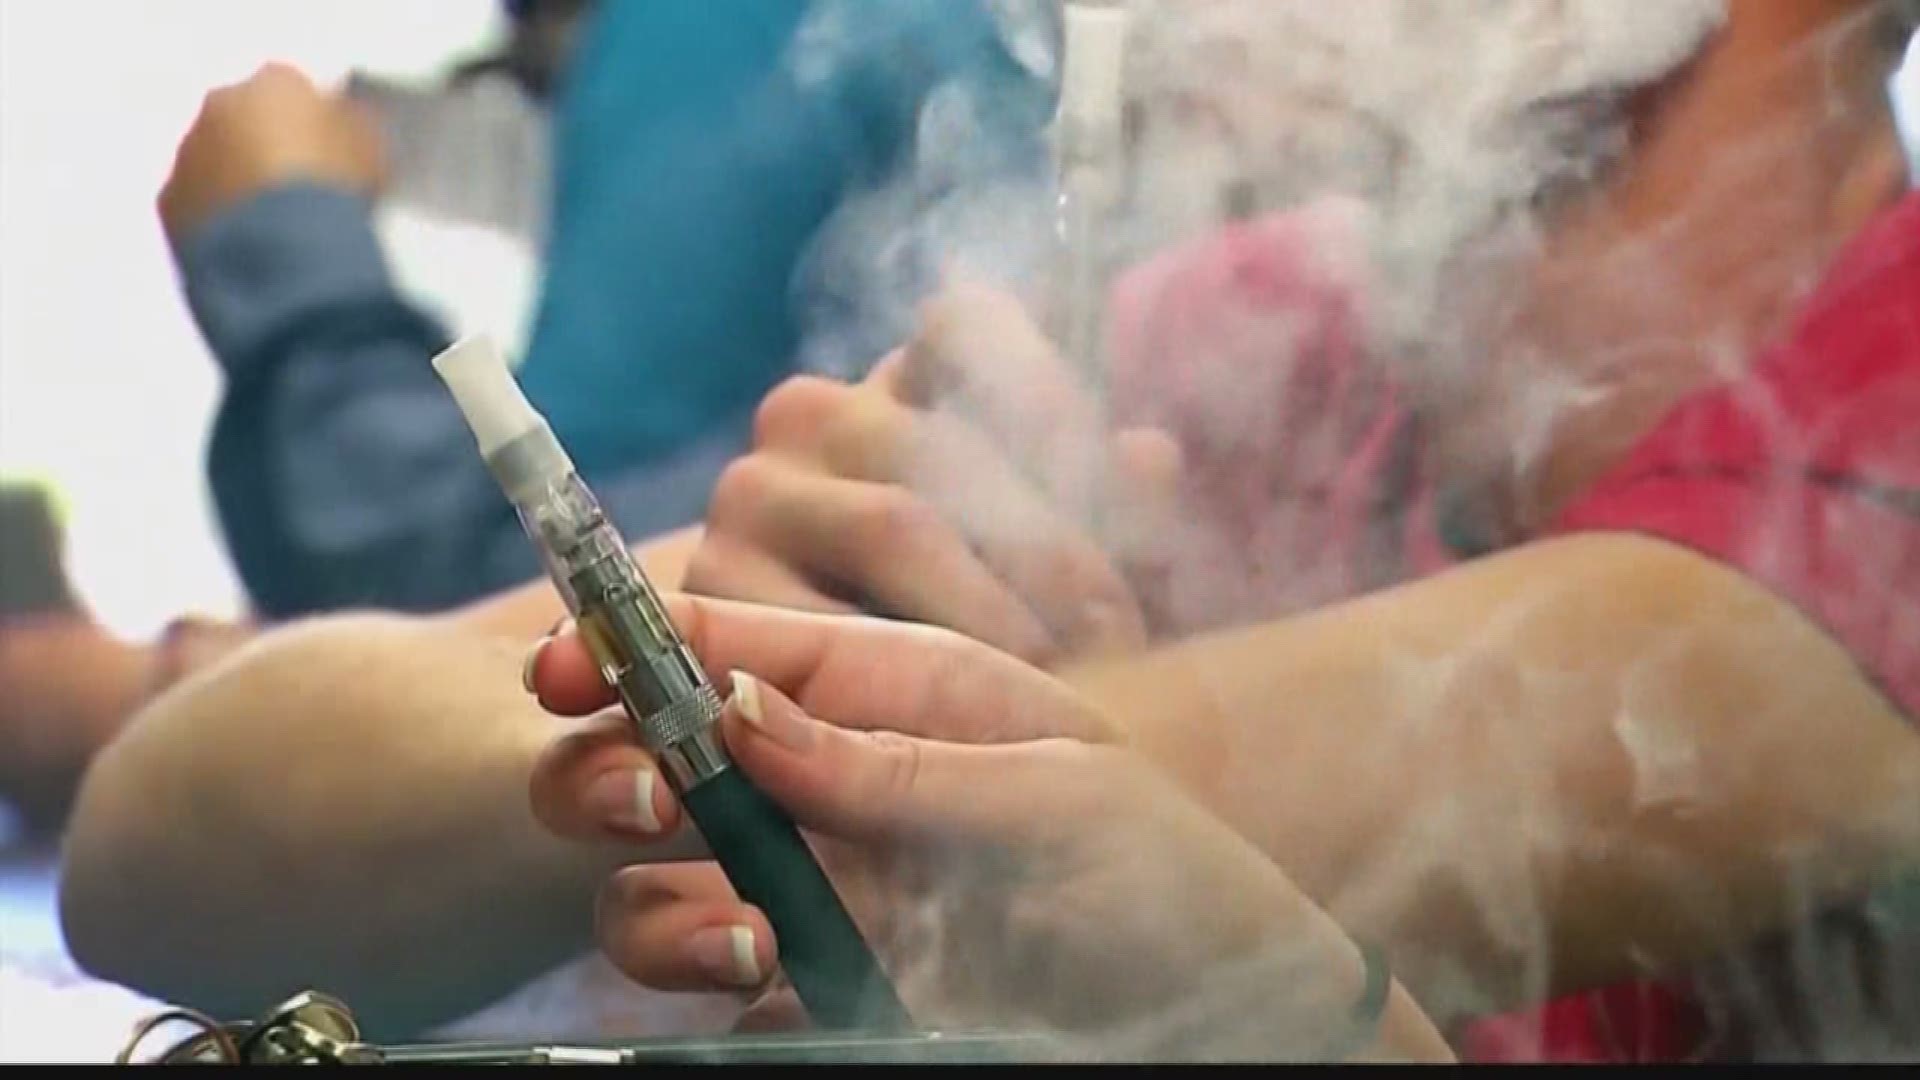 A 15-year-old student at Sickles High School in Hillsborough County recently was arrested after smoking a vape with liquid THC and sharing it with two other female students.